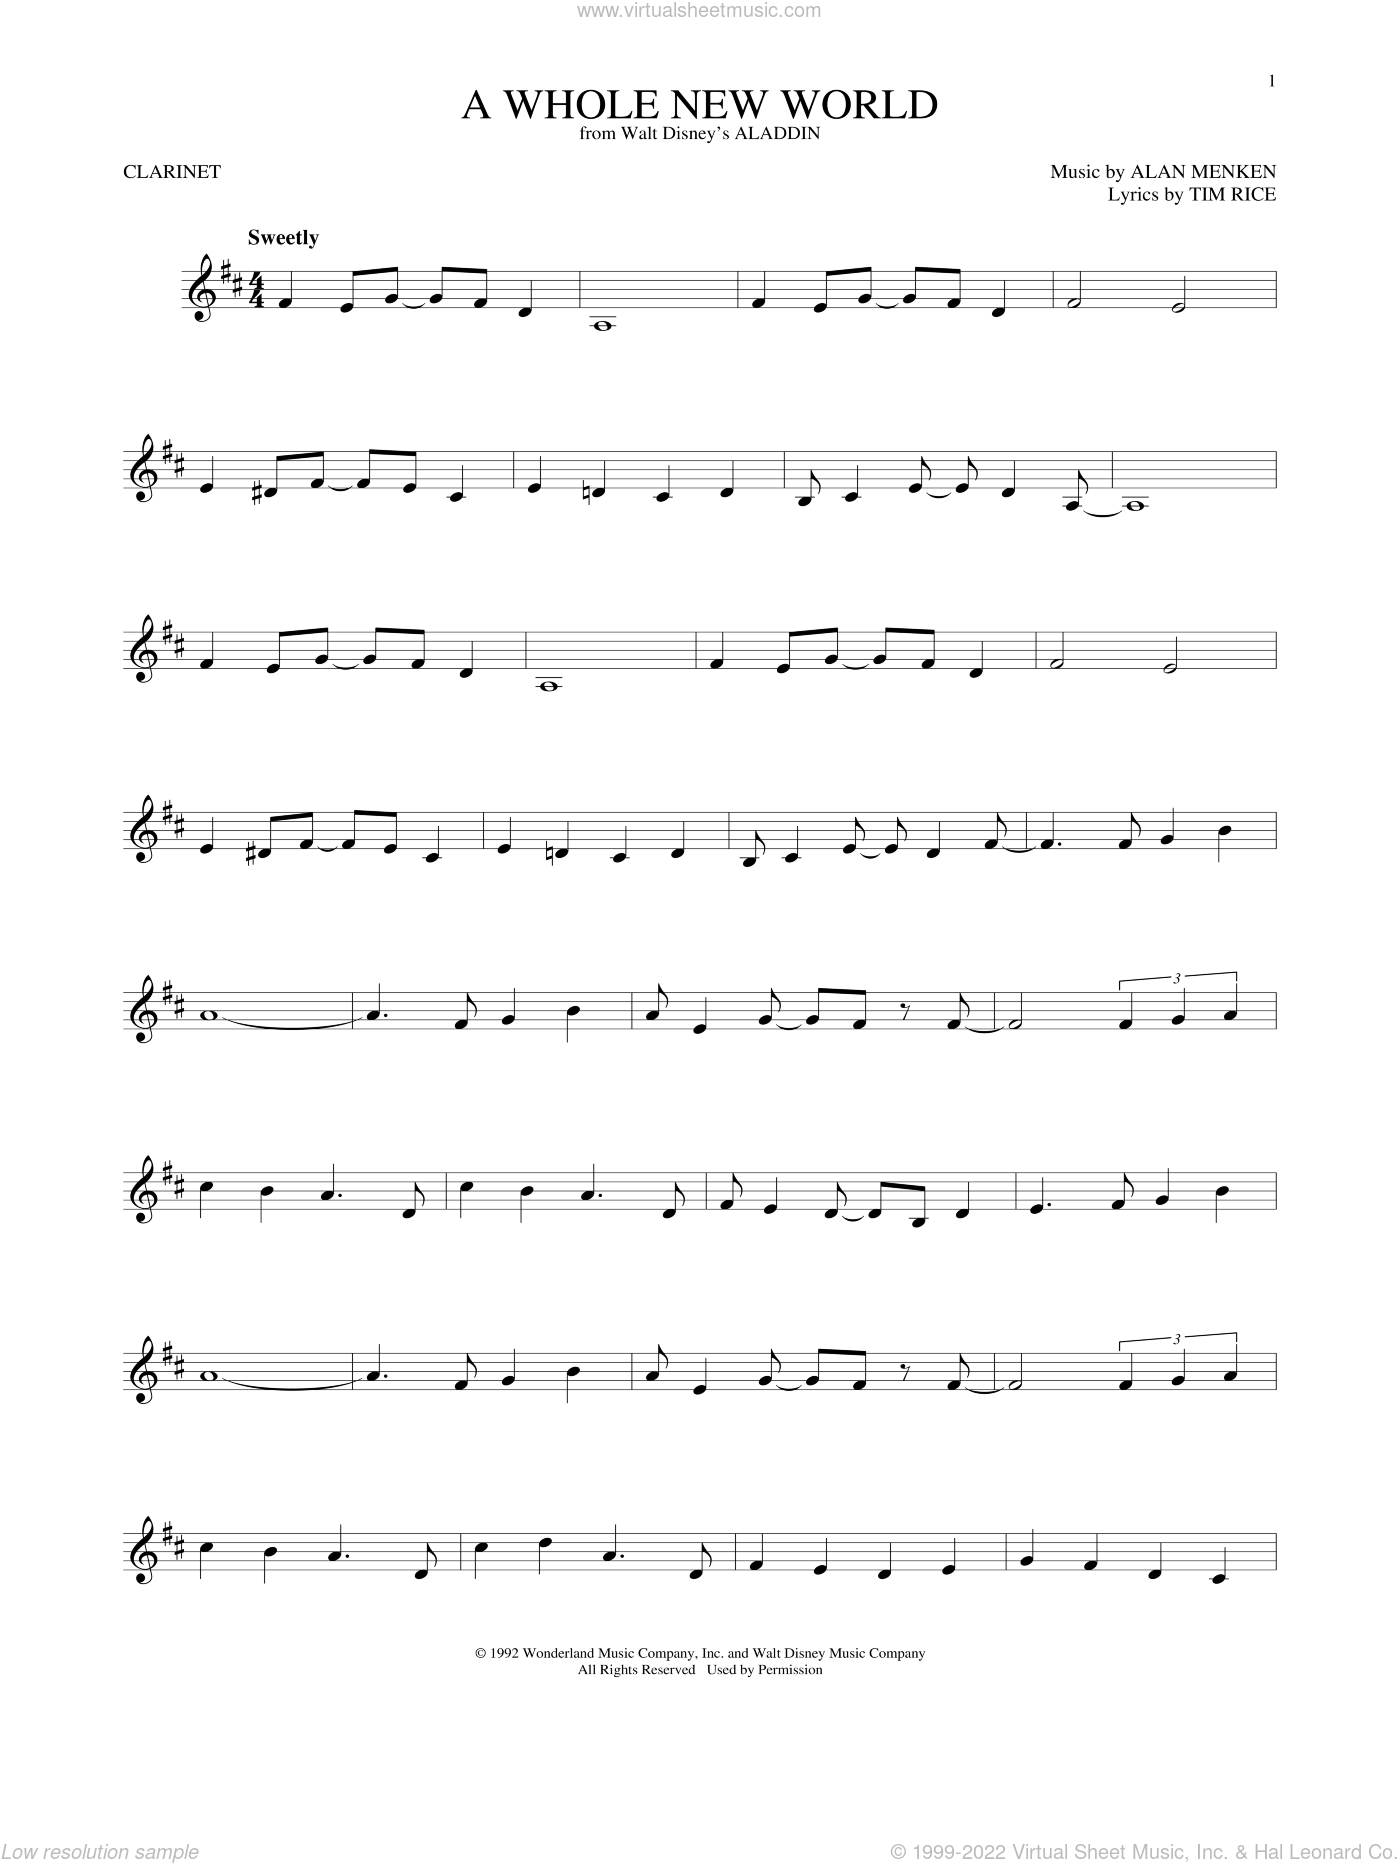 Menken A Whole New World From Aladdin Sheet Music For Clarinet Solo